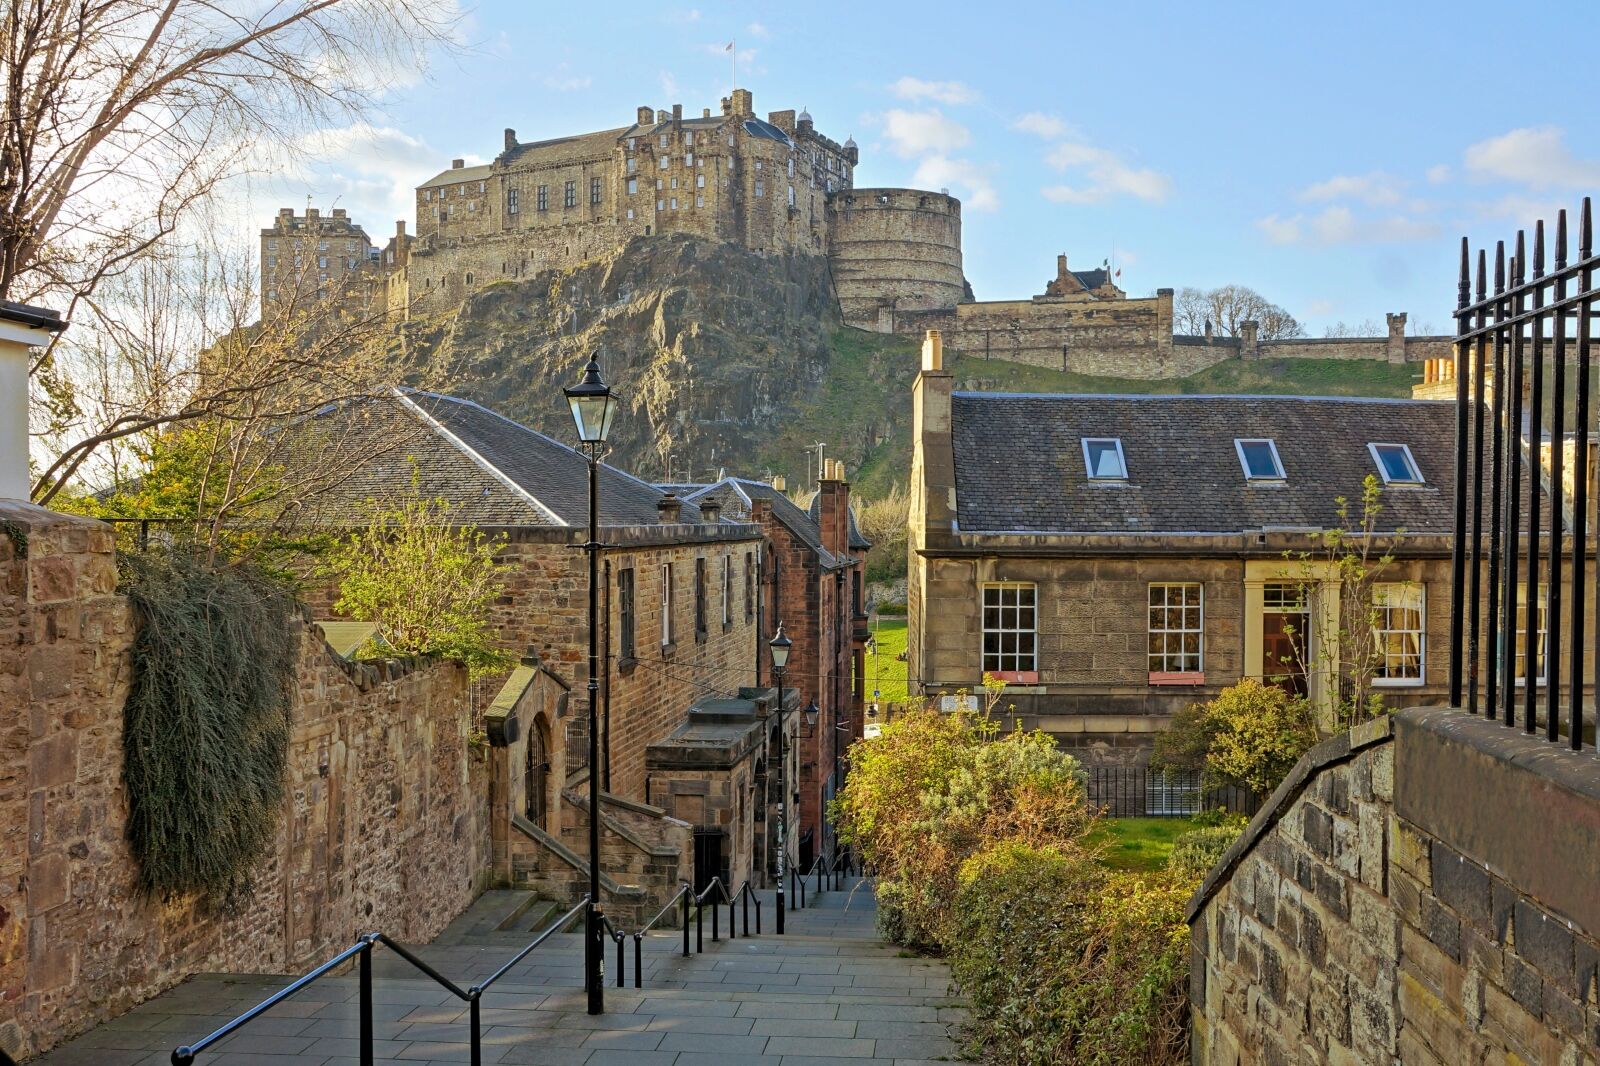 View of Edinburgh castle from the medieval streets of the old town one of the best things to do in Edinburgh